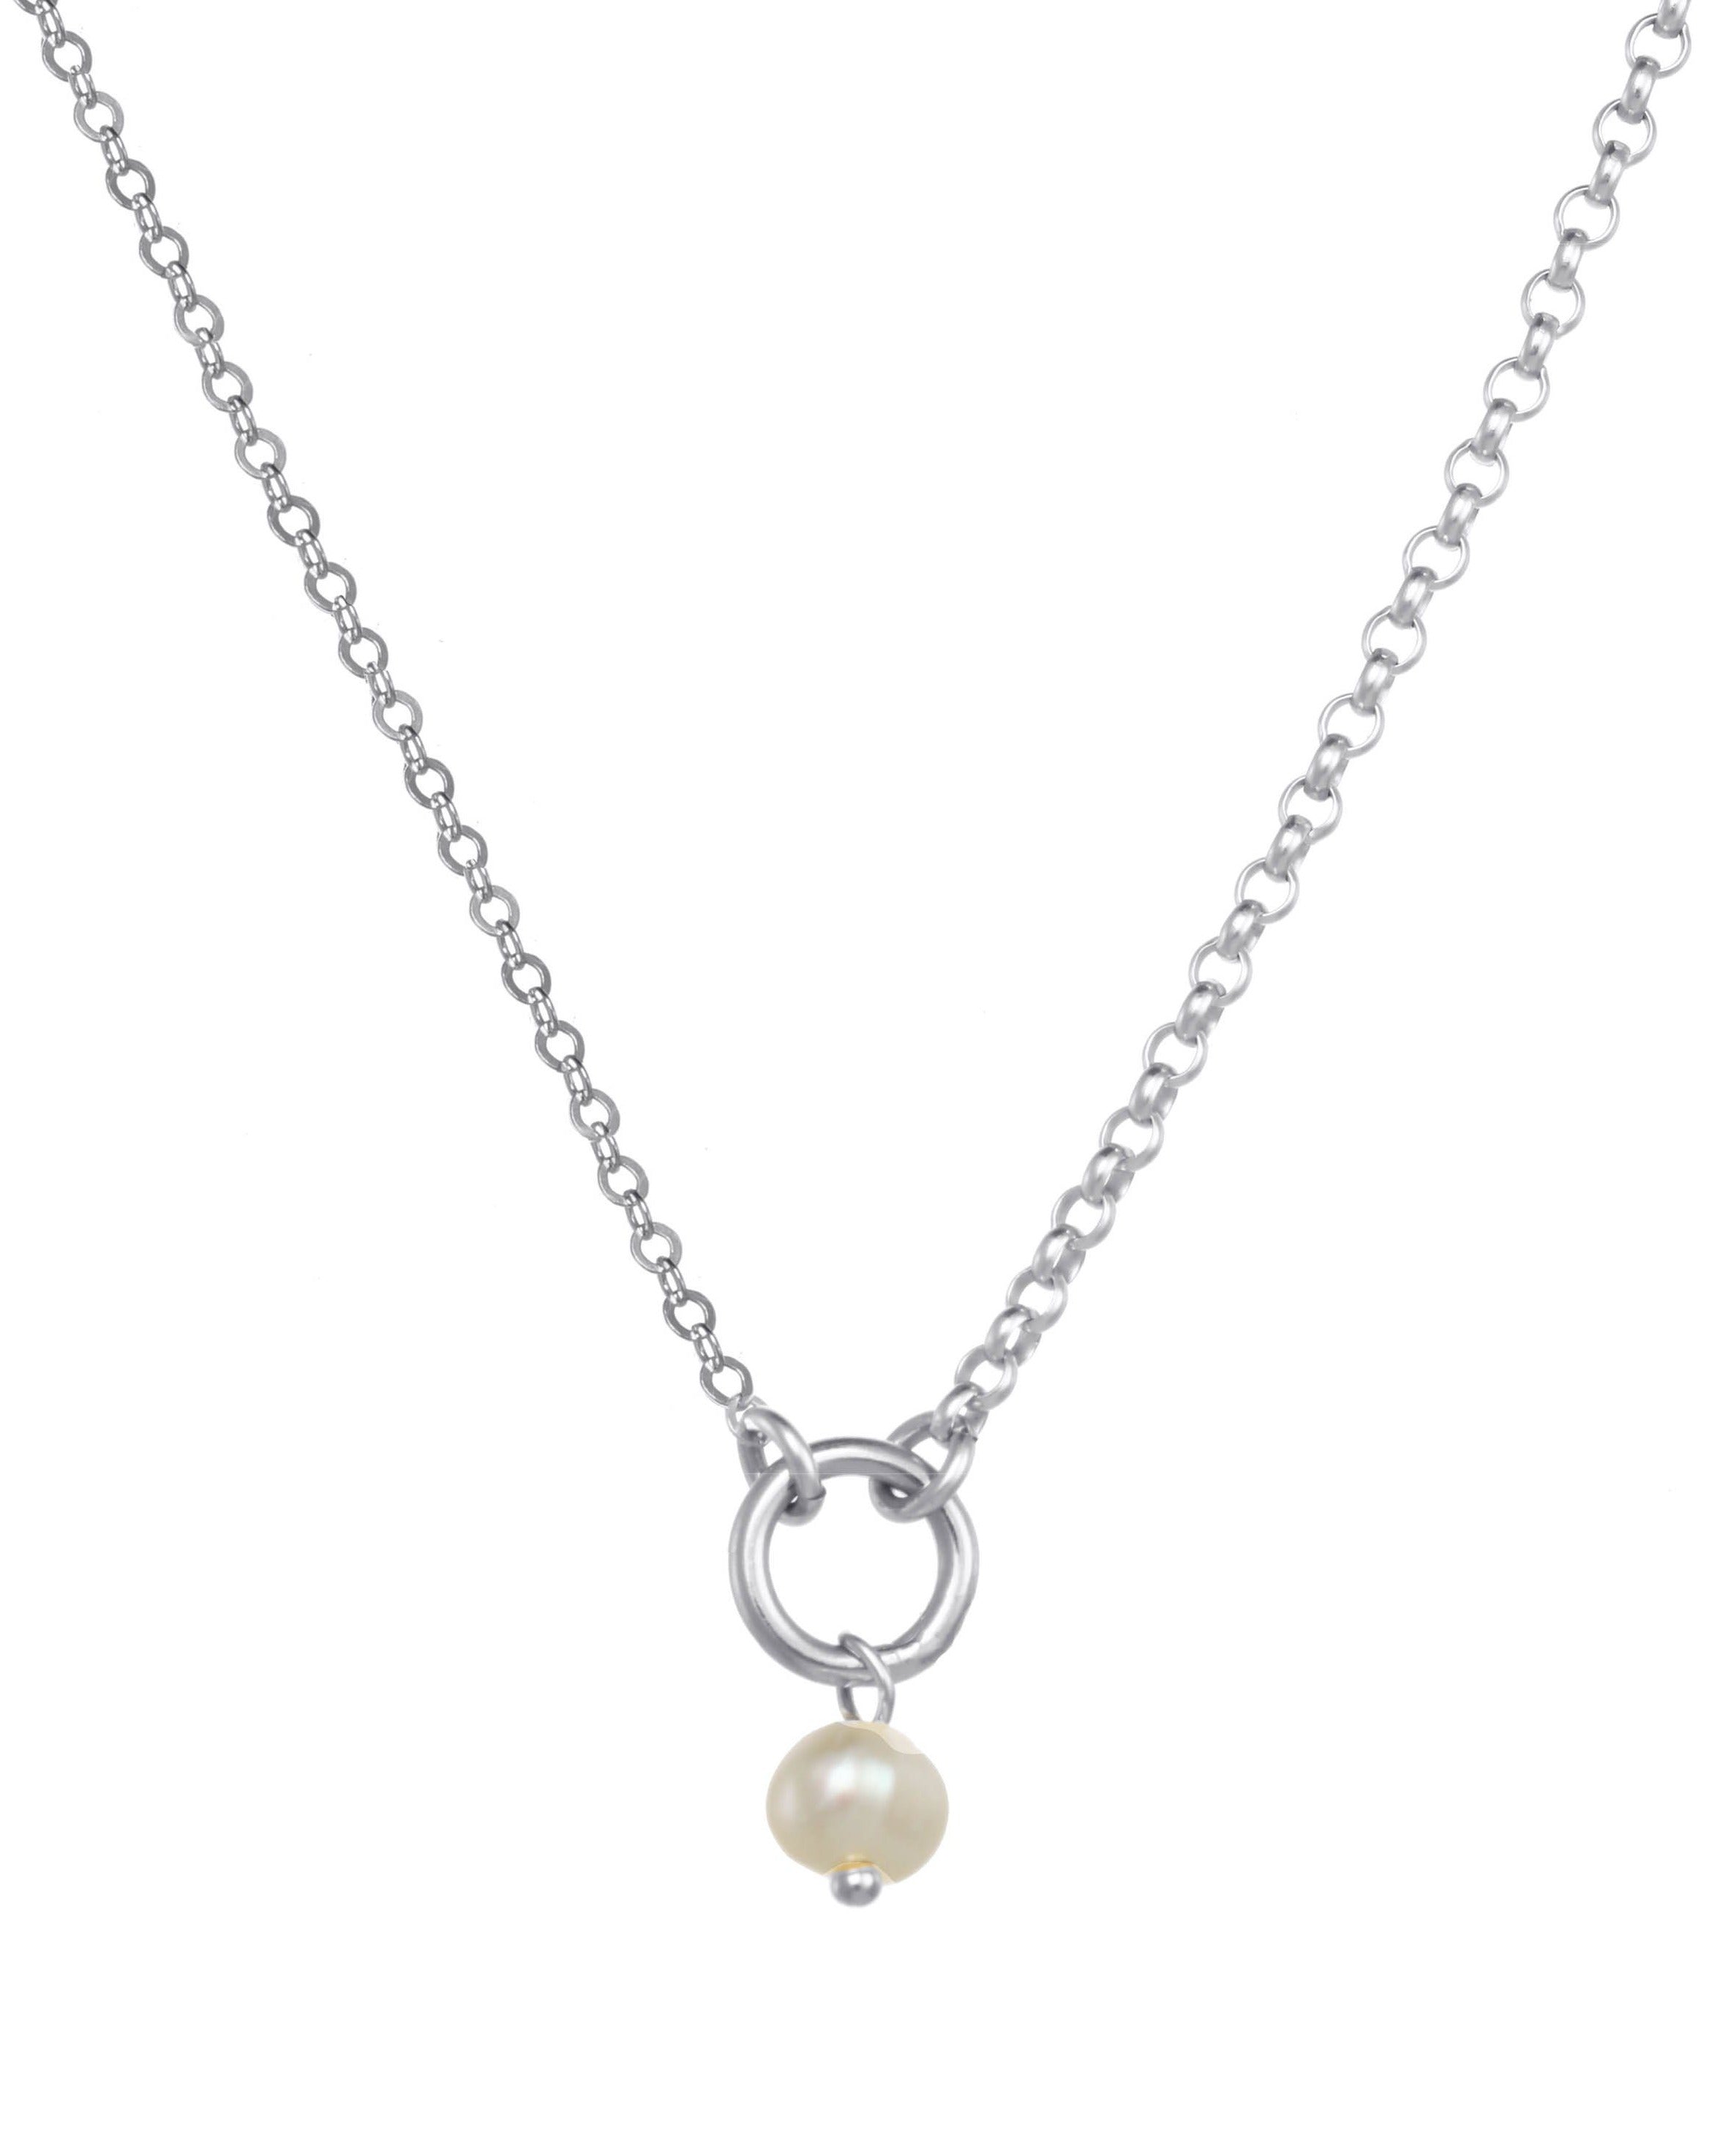 Divya Necklace by KOZAKH. A 16 to 18 inch adjustable length necklace in Sterling Silver, featuring a white 3-4mm pearl.